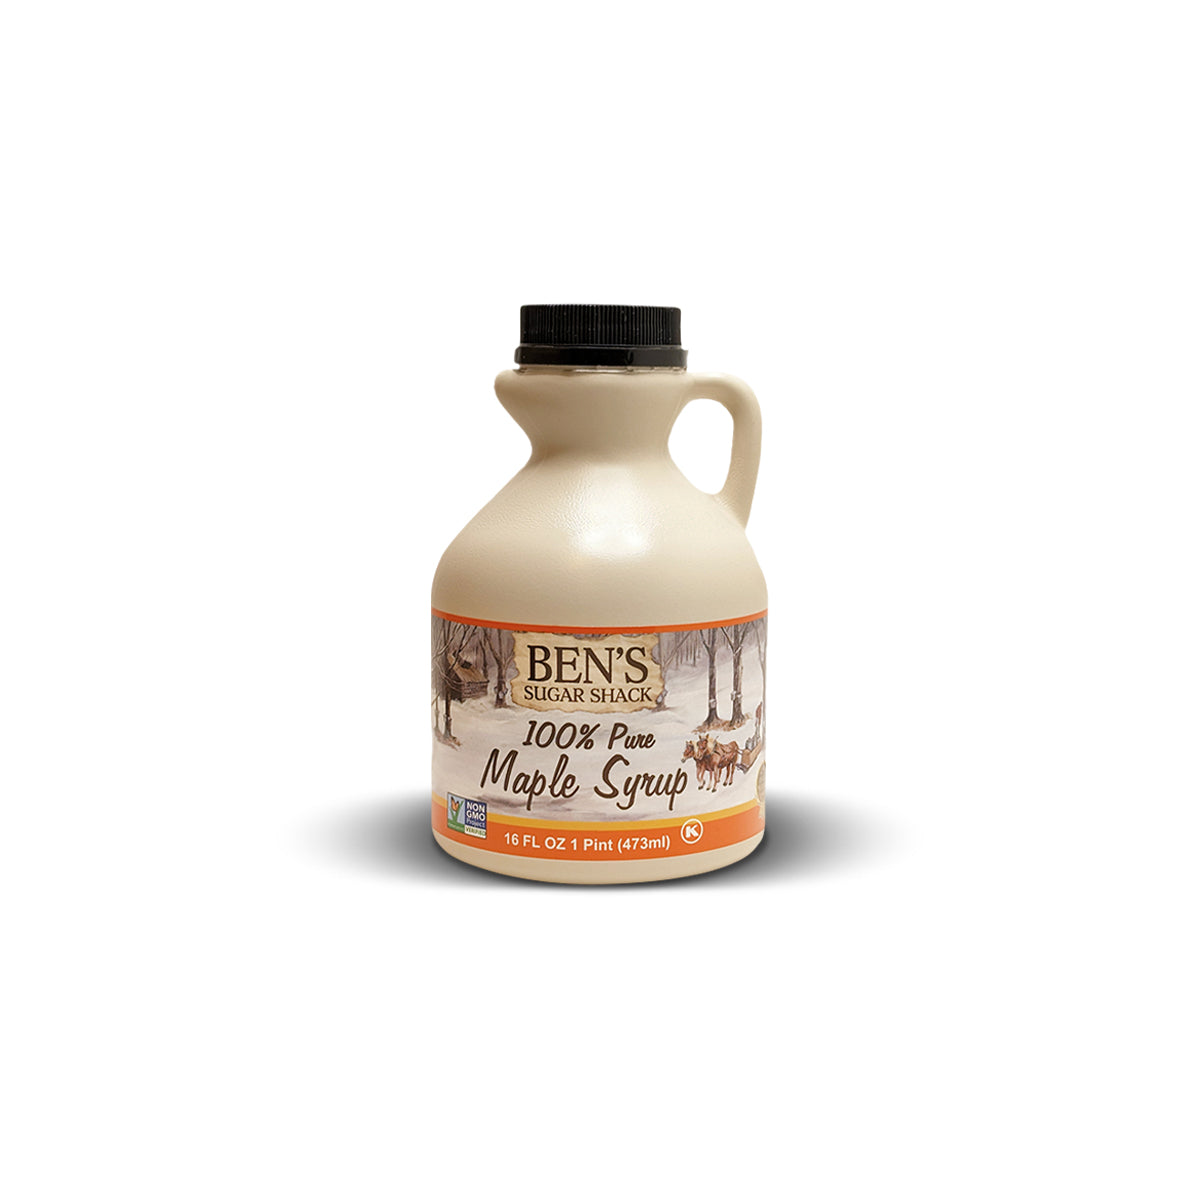 Ben's Pure Maple Syrup in Plastic Jugs - Bens Sugar Shack Pint / Grade A Dark Robust